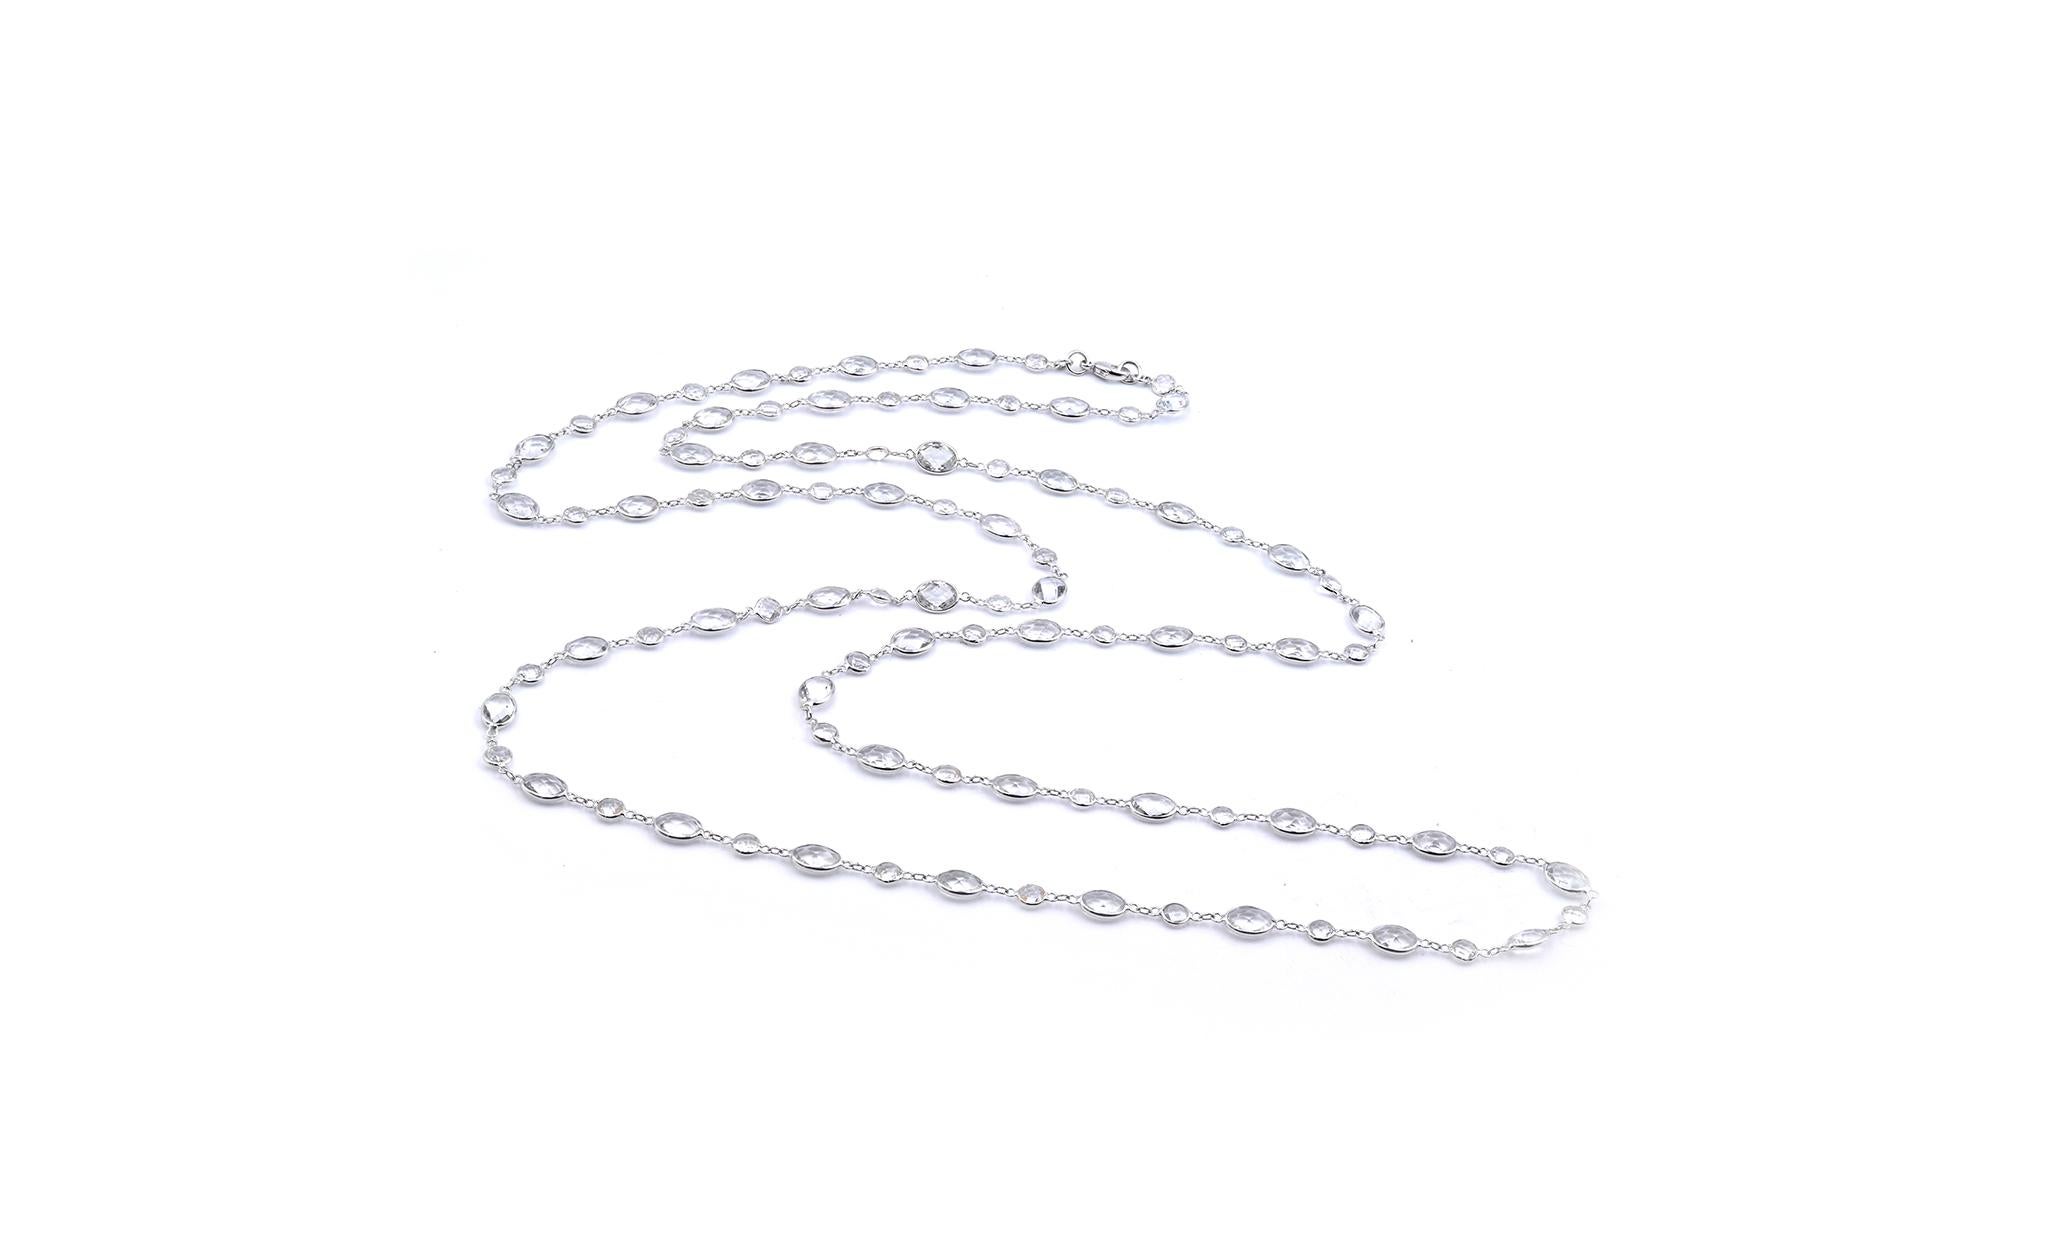 Material: 14K white gold
Dimensions: necklace measures 40-inches
Weight: 18.26 grams